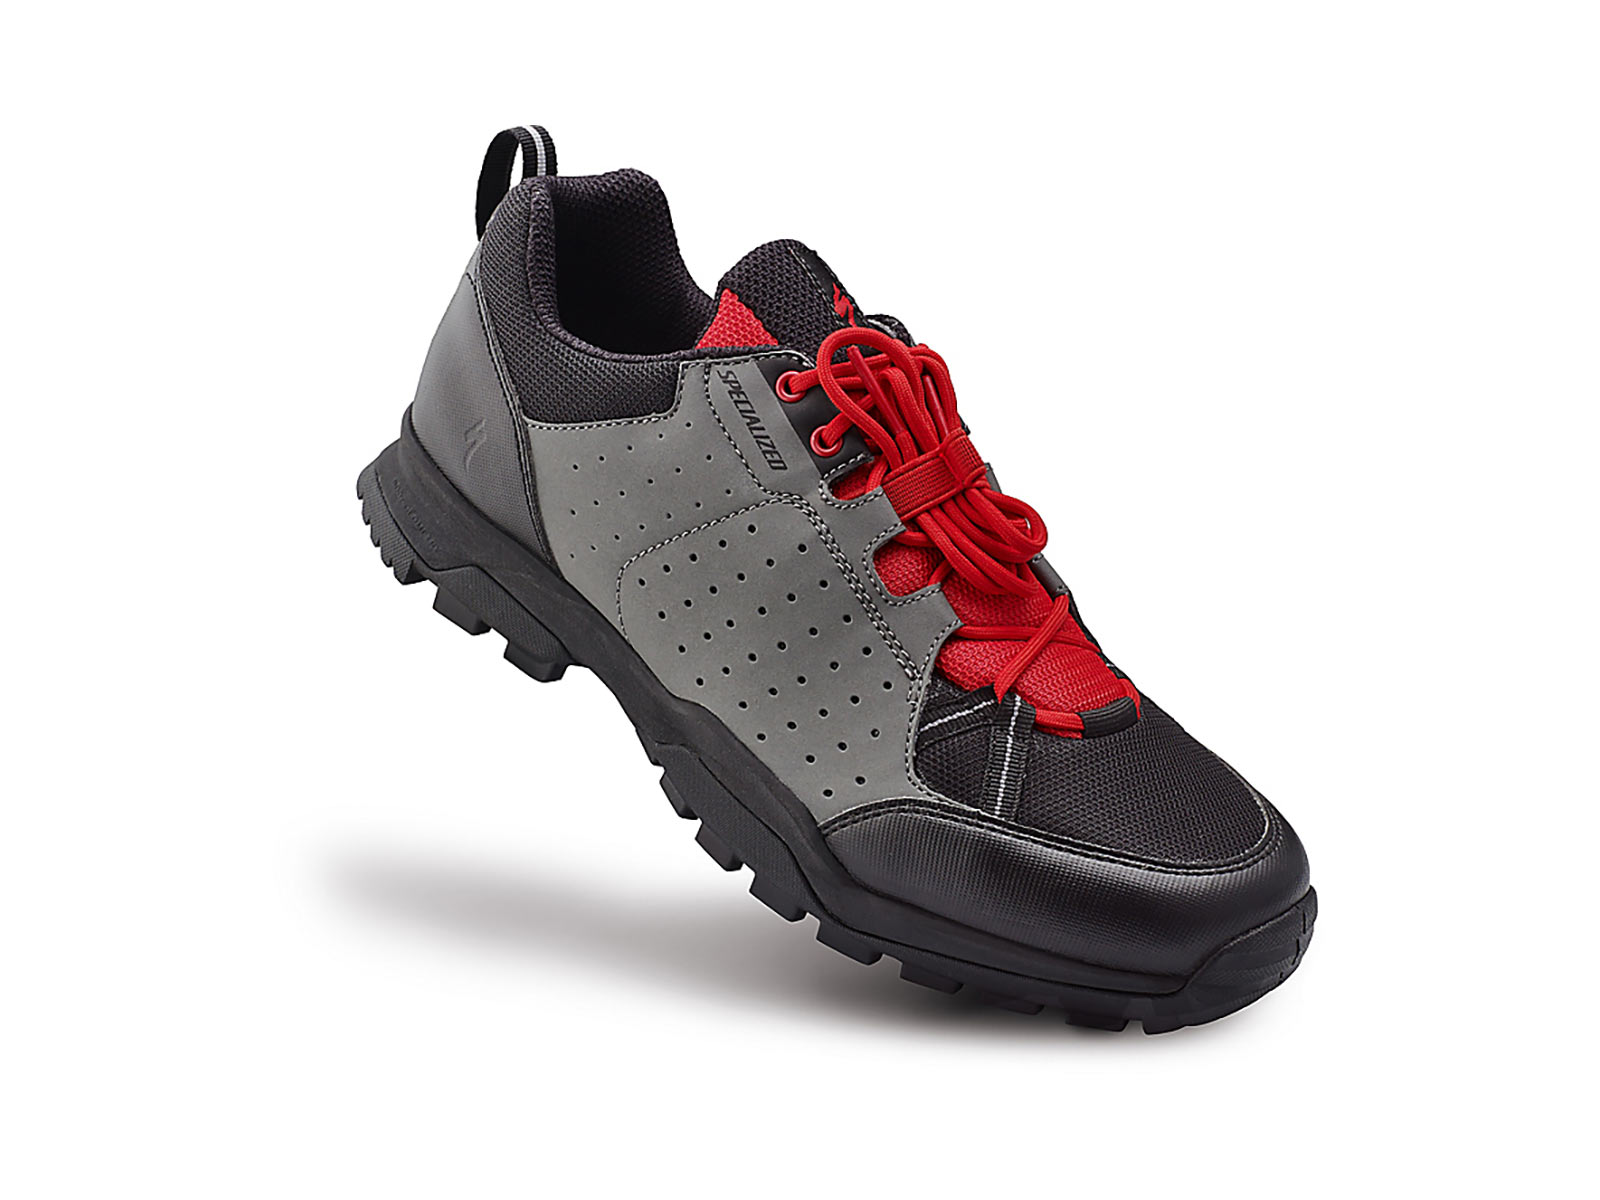 Specialized Tahoe Shoes - Black/Red (48)